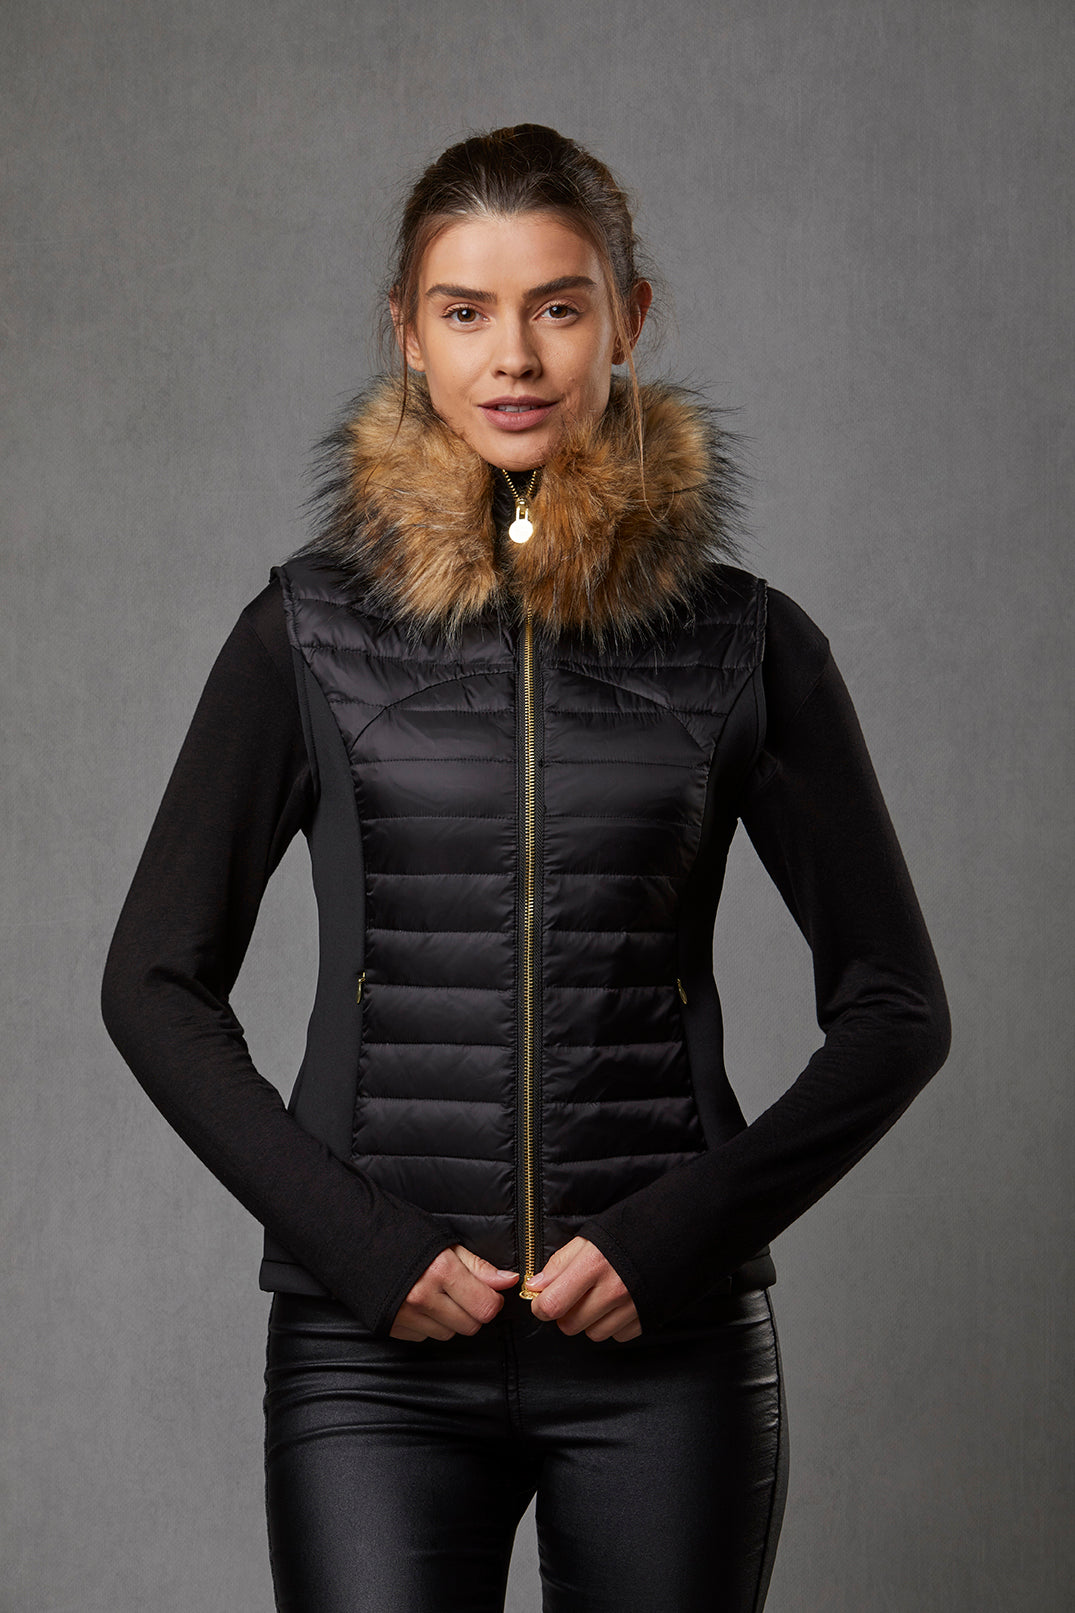 Model wearing a women's puffer gilet in black with stretch sides and a detachable faux fur collar and with gold zip